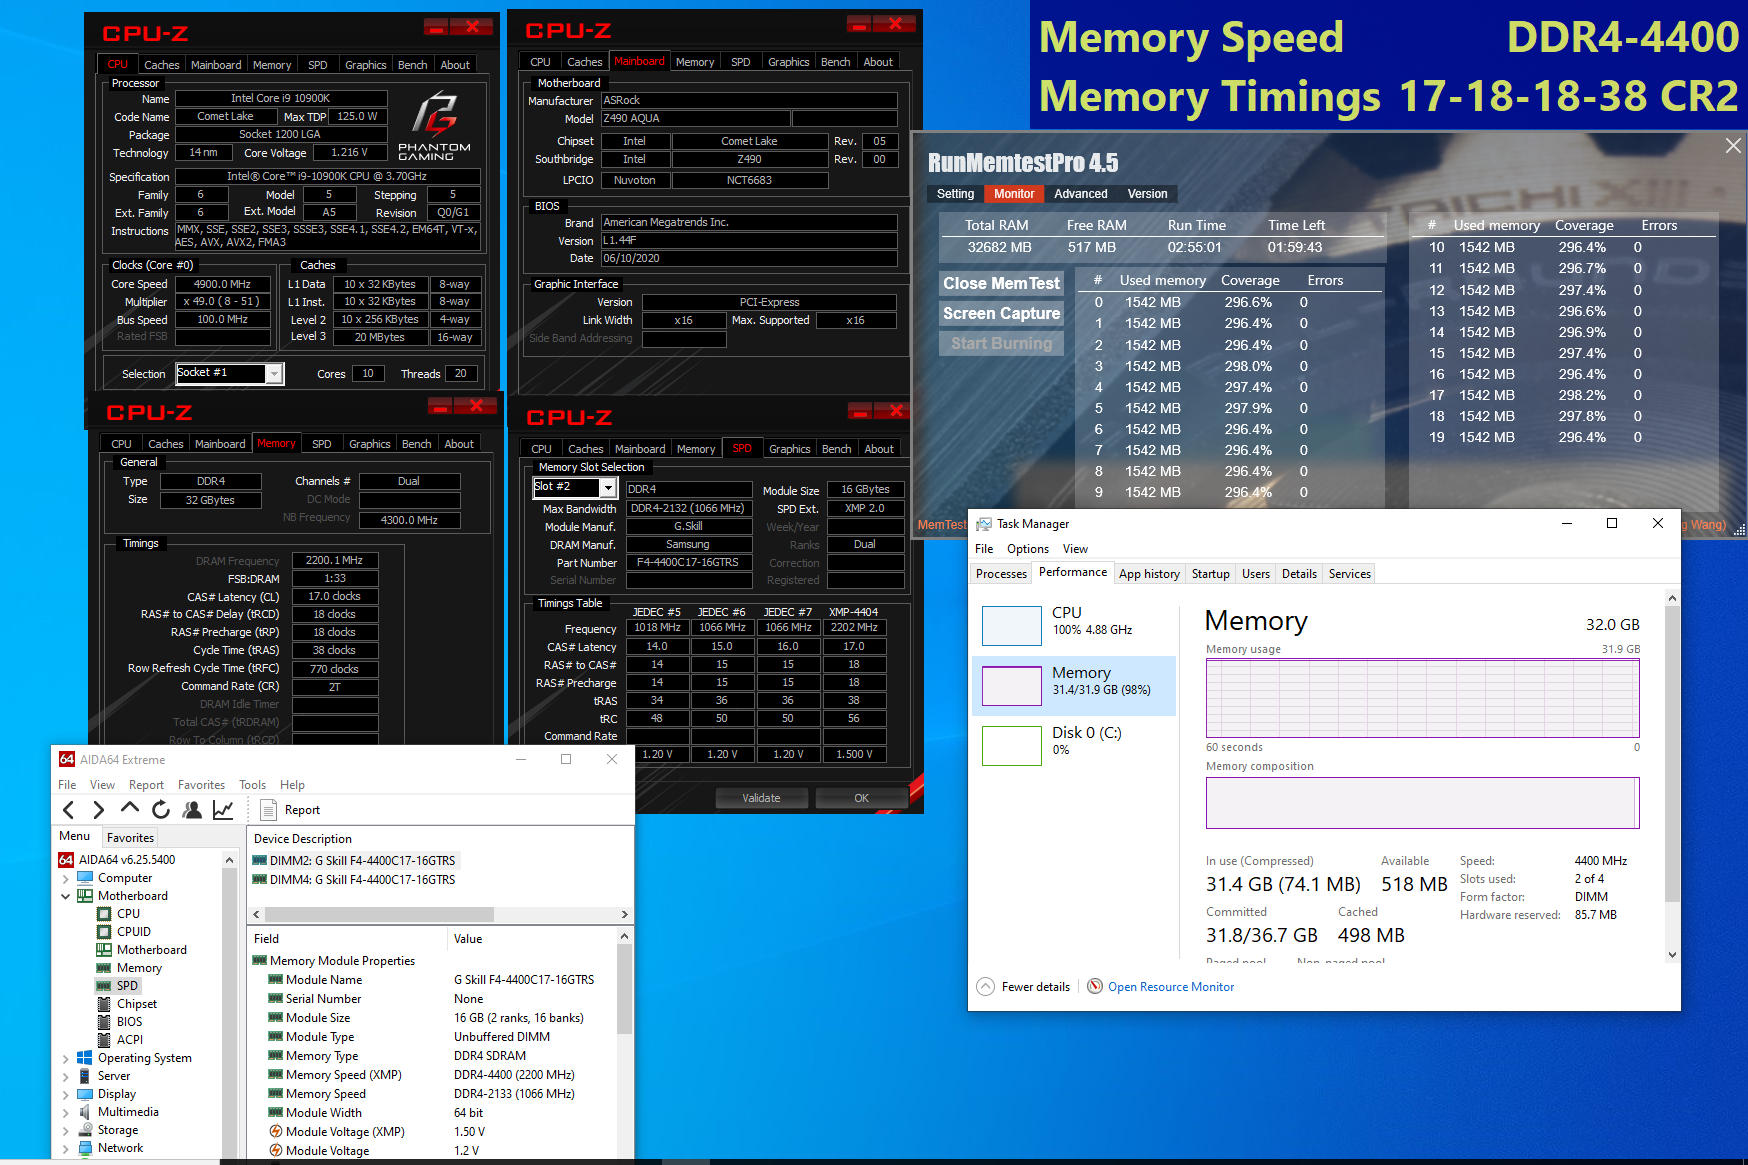 Media asset in full size related to 3dfxzone.it news item entitled as follows: G.SKILL annuncia i moduli di DDR4 Trident Z Royal con velocit fino a 4400MHz | Image Name: news30840_G-SKILL-Trident-Z-Royal-DDR4_2.png